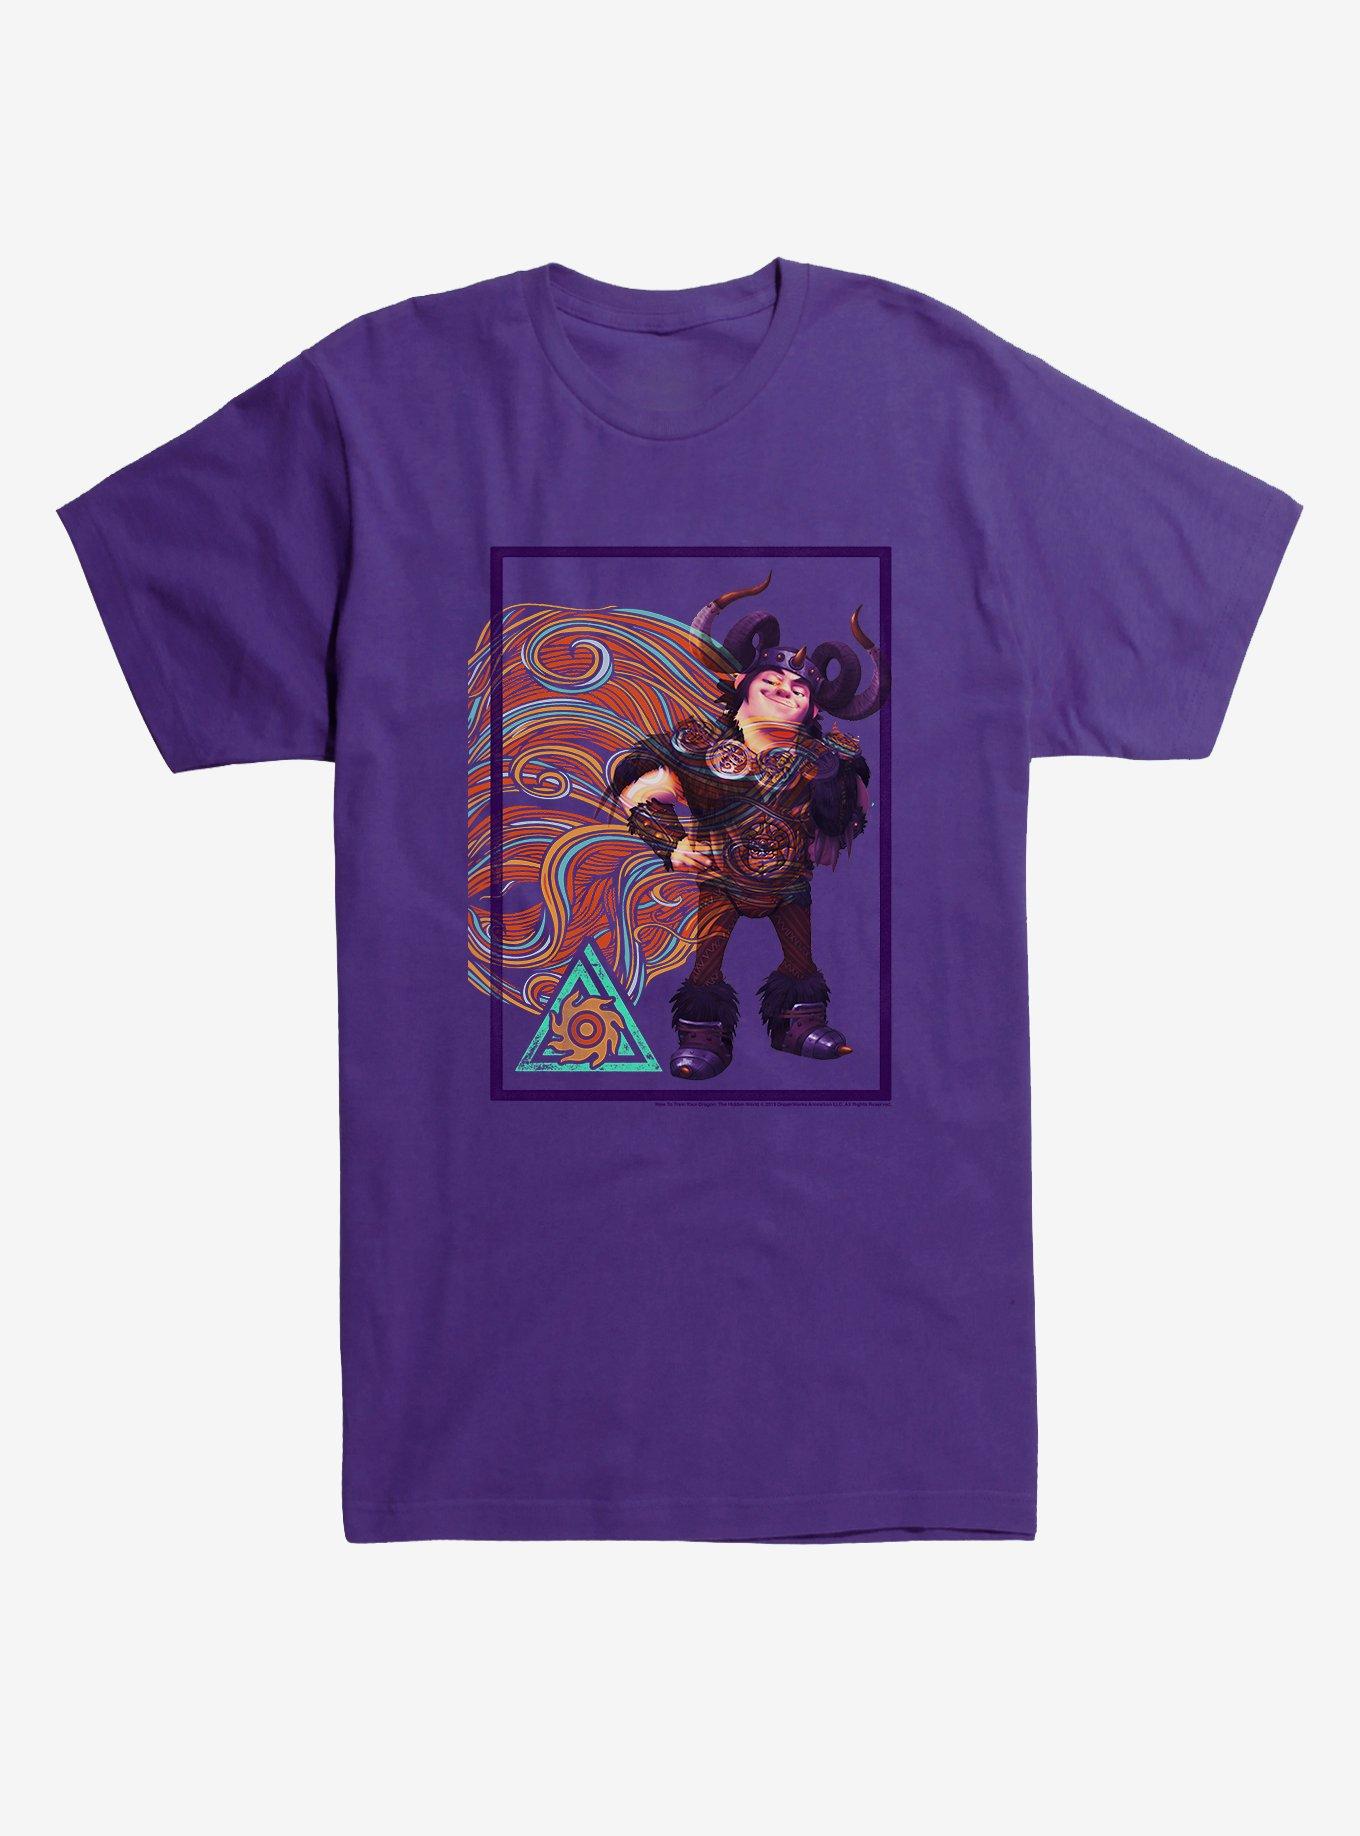 How To Train Your Dragon Snotlout Swirl T-Shirt, PURPLE, hi-res